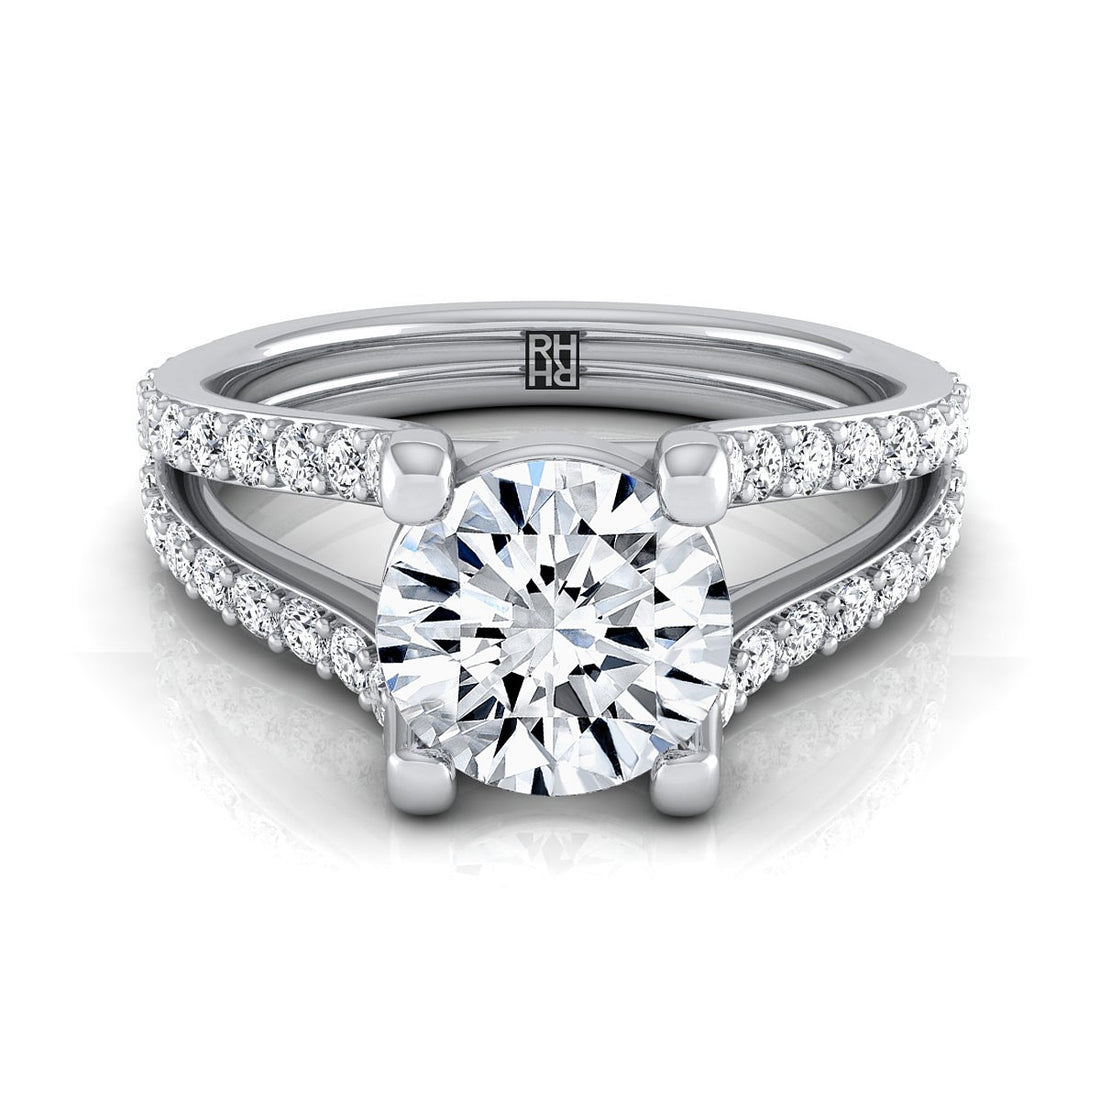 Things to Know about Diamond Estate Rings